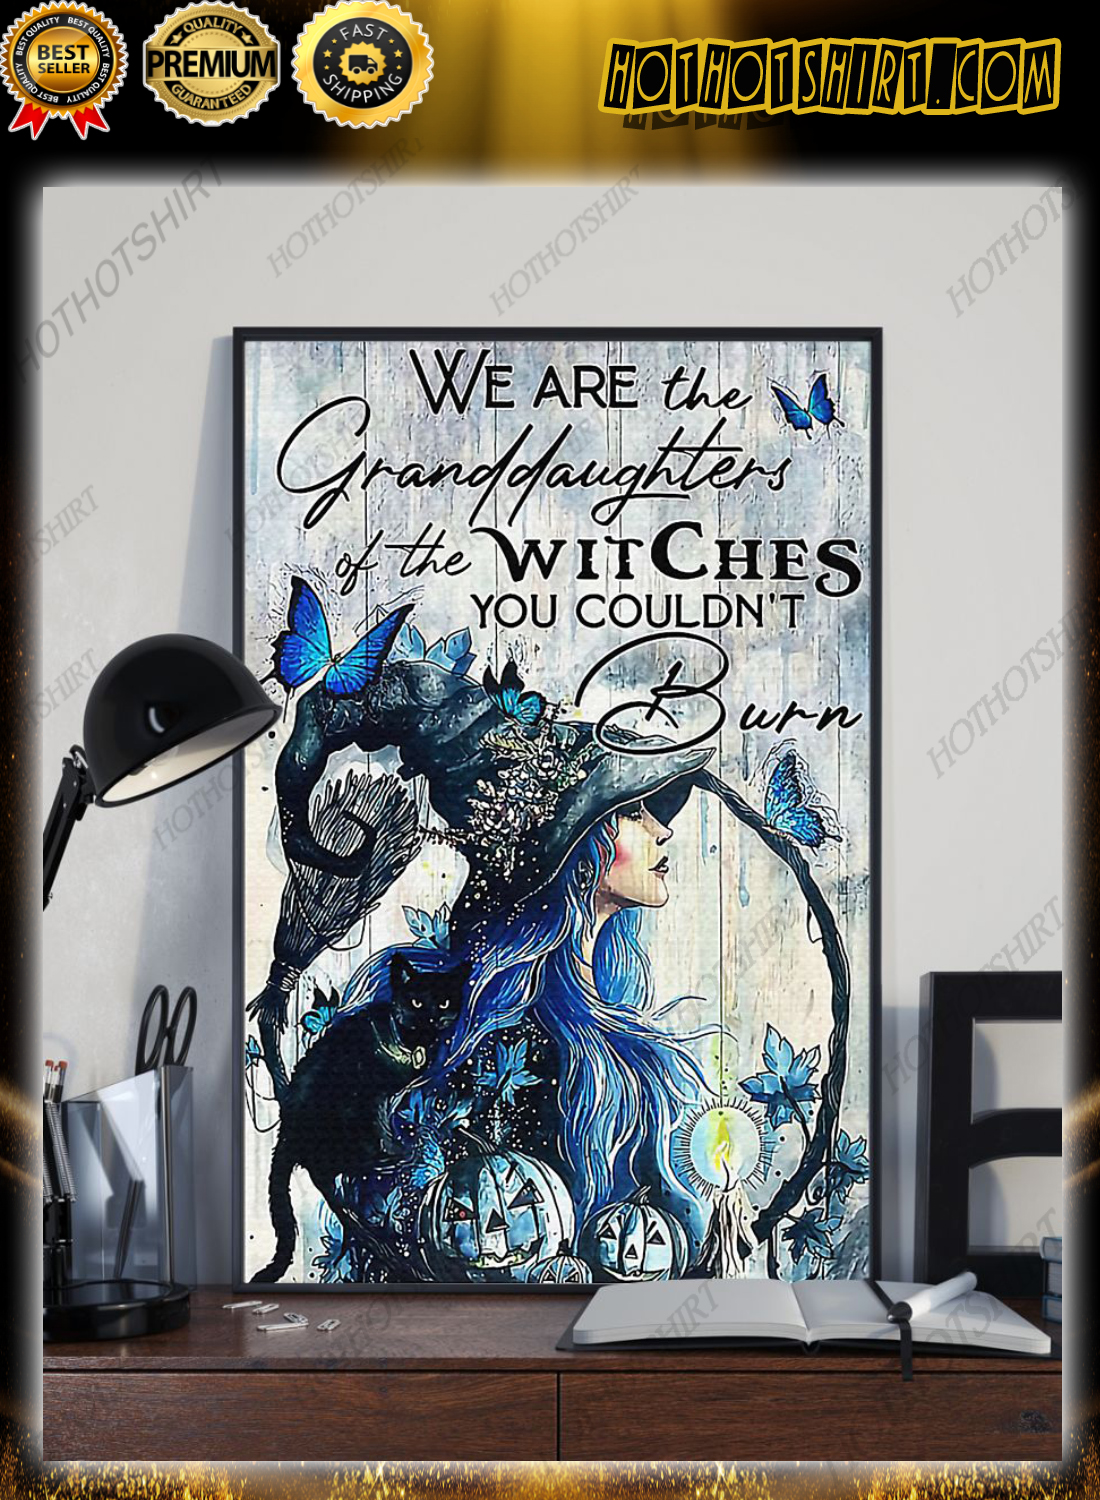 We are the granddaughter of the witches you couldn’t burn poster